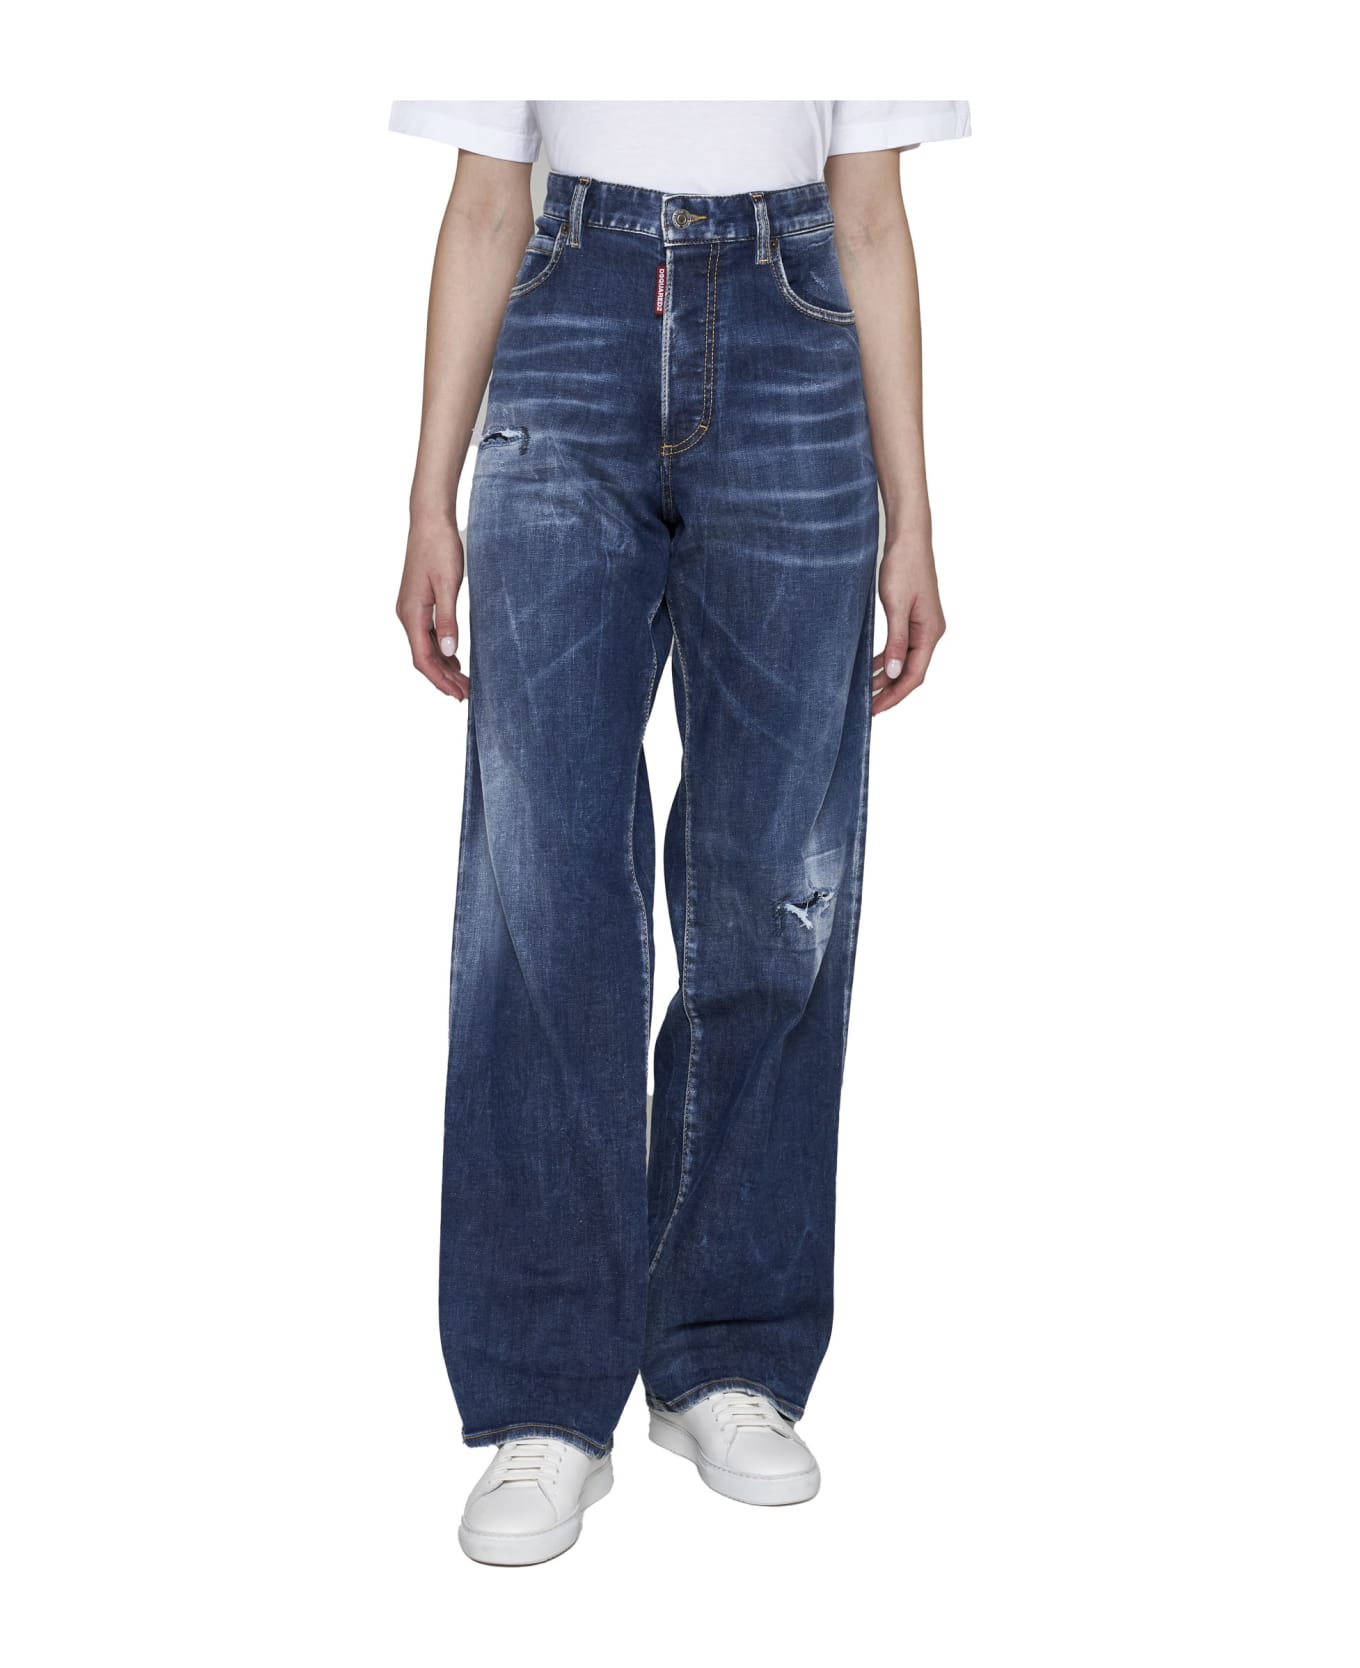 Dsquared2 Icon San Diego Jeans - Navy blue デニム